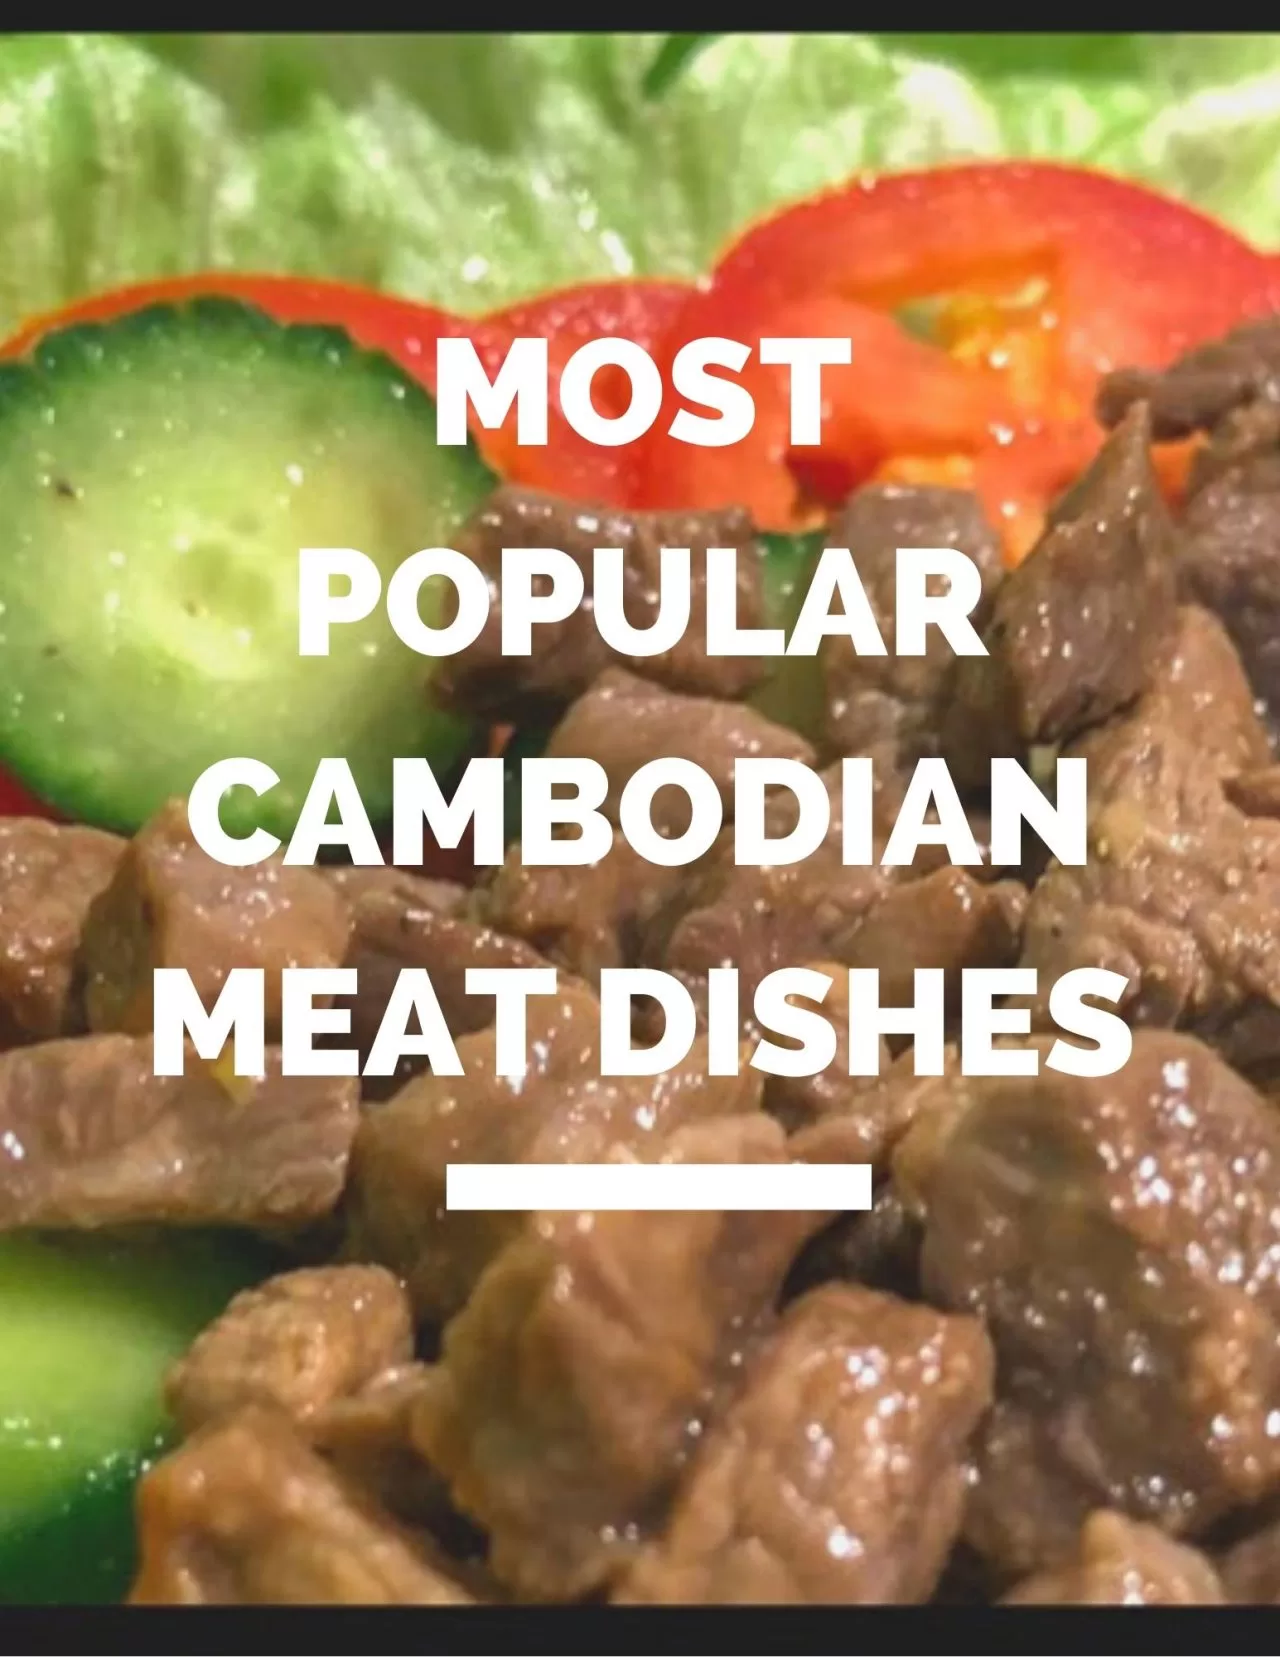 Cambodian Meat Dishes